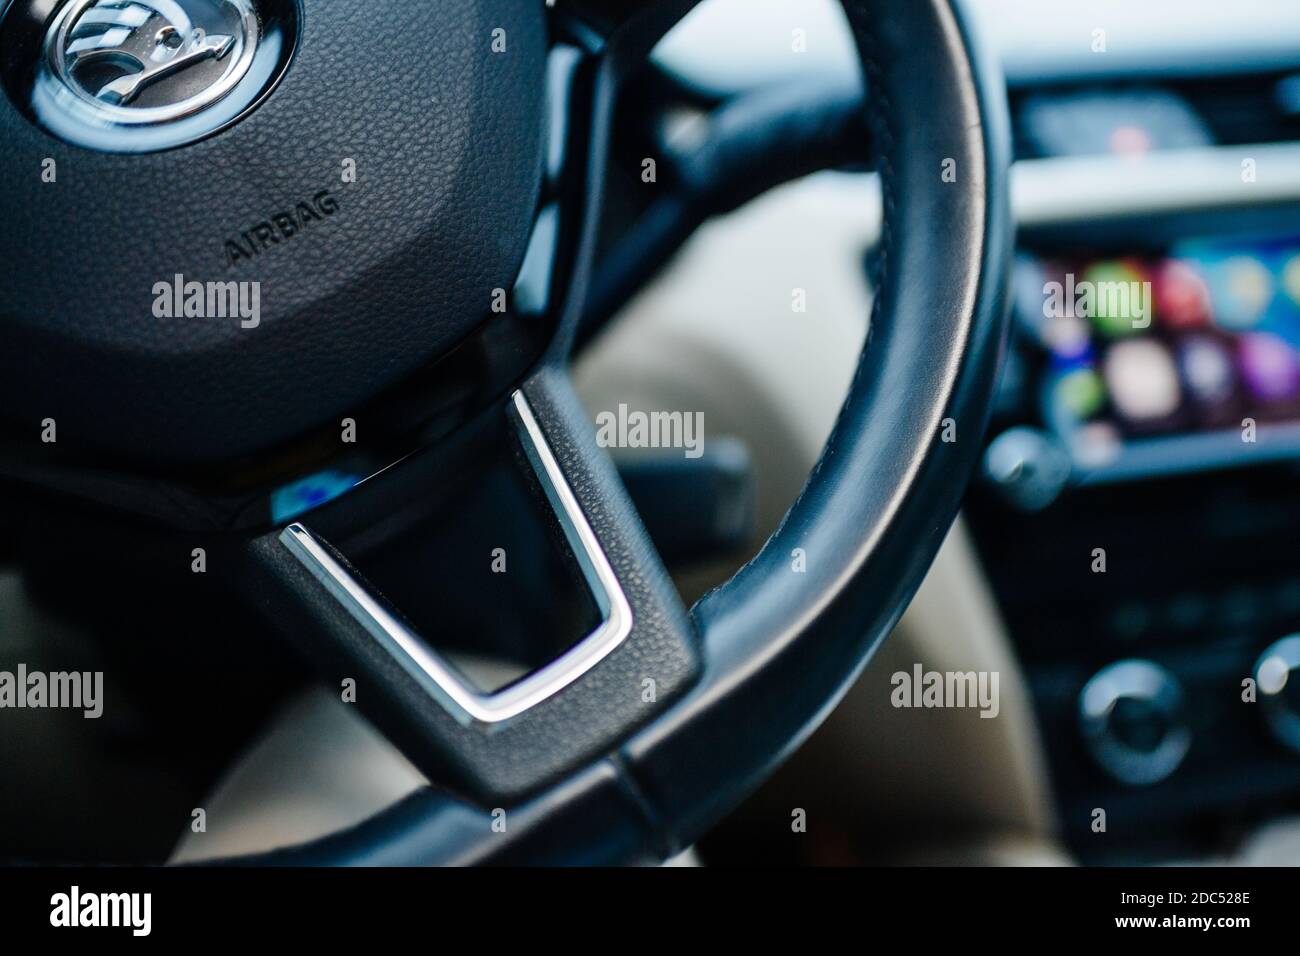 Paris, France - Nov 11, 2020: Detail of a steering wheel with Airbag sign and CarPlay screen dashboard in background Stock Photo